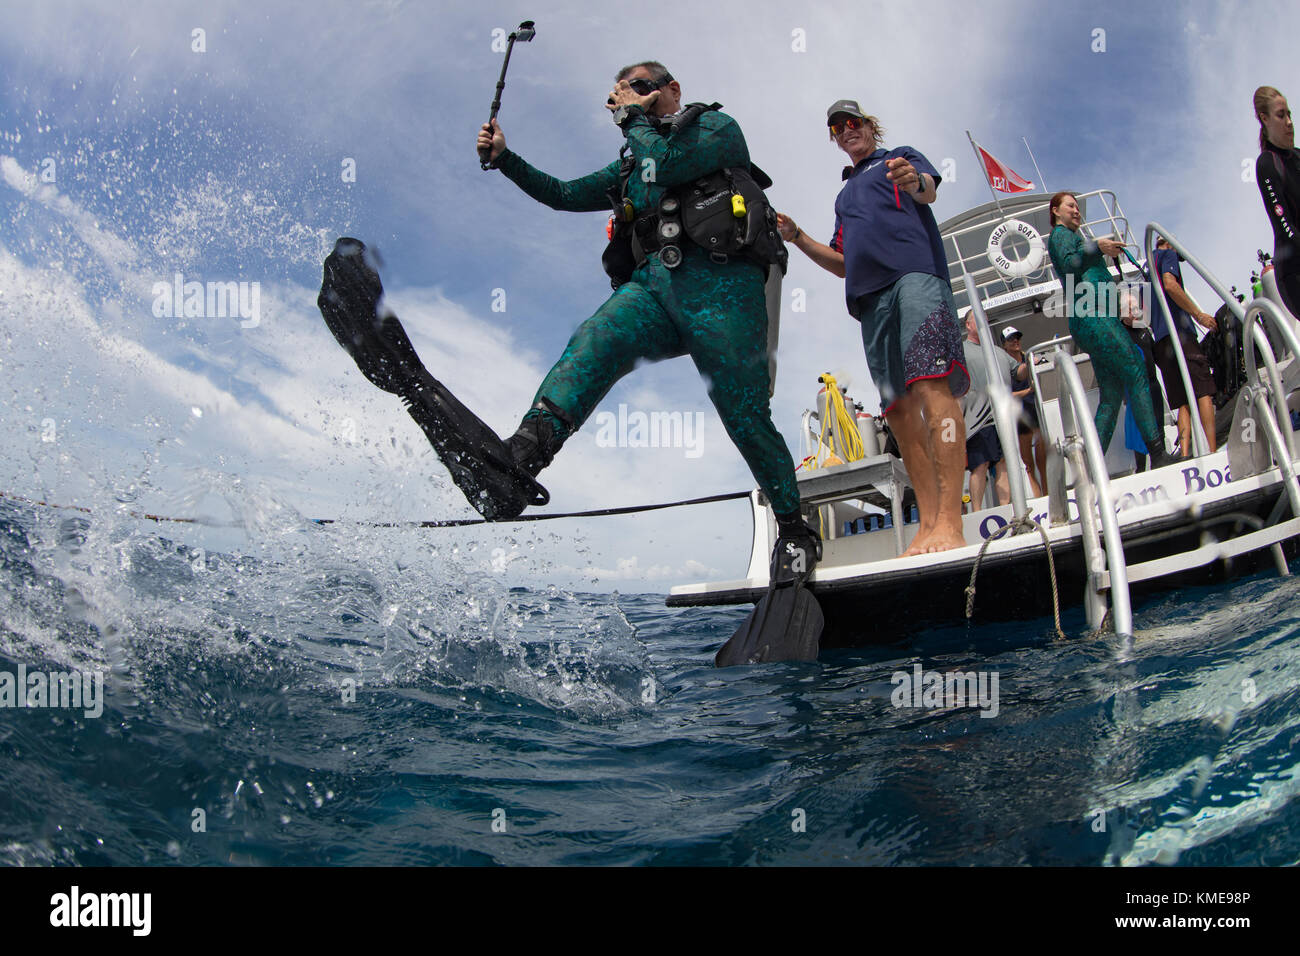 Scuba diver enters water doing giant stride. Stock Photo